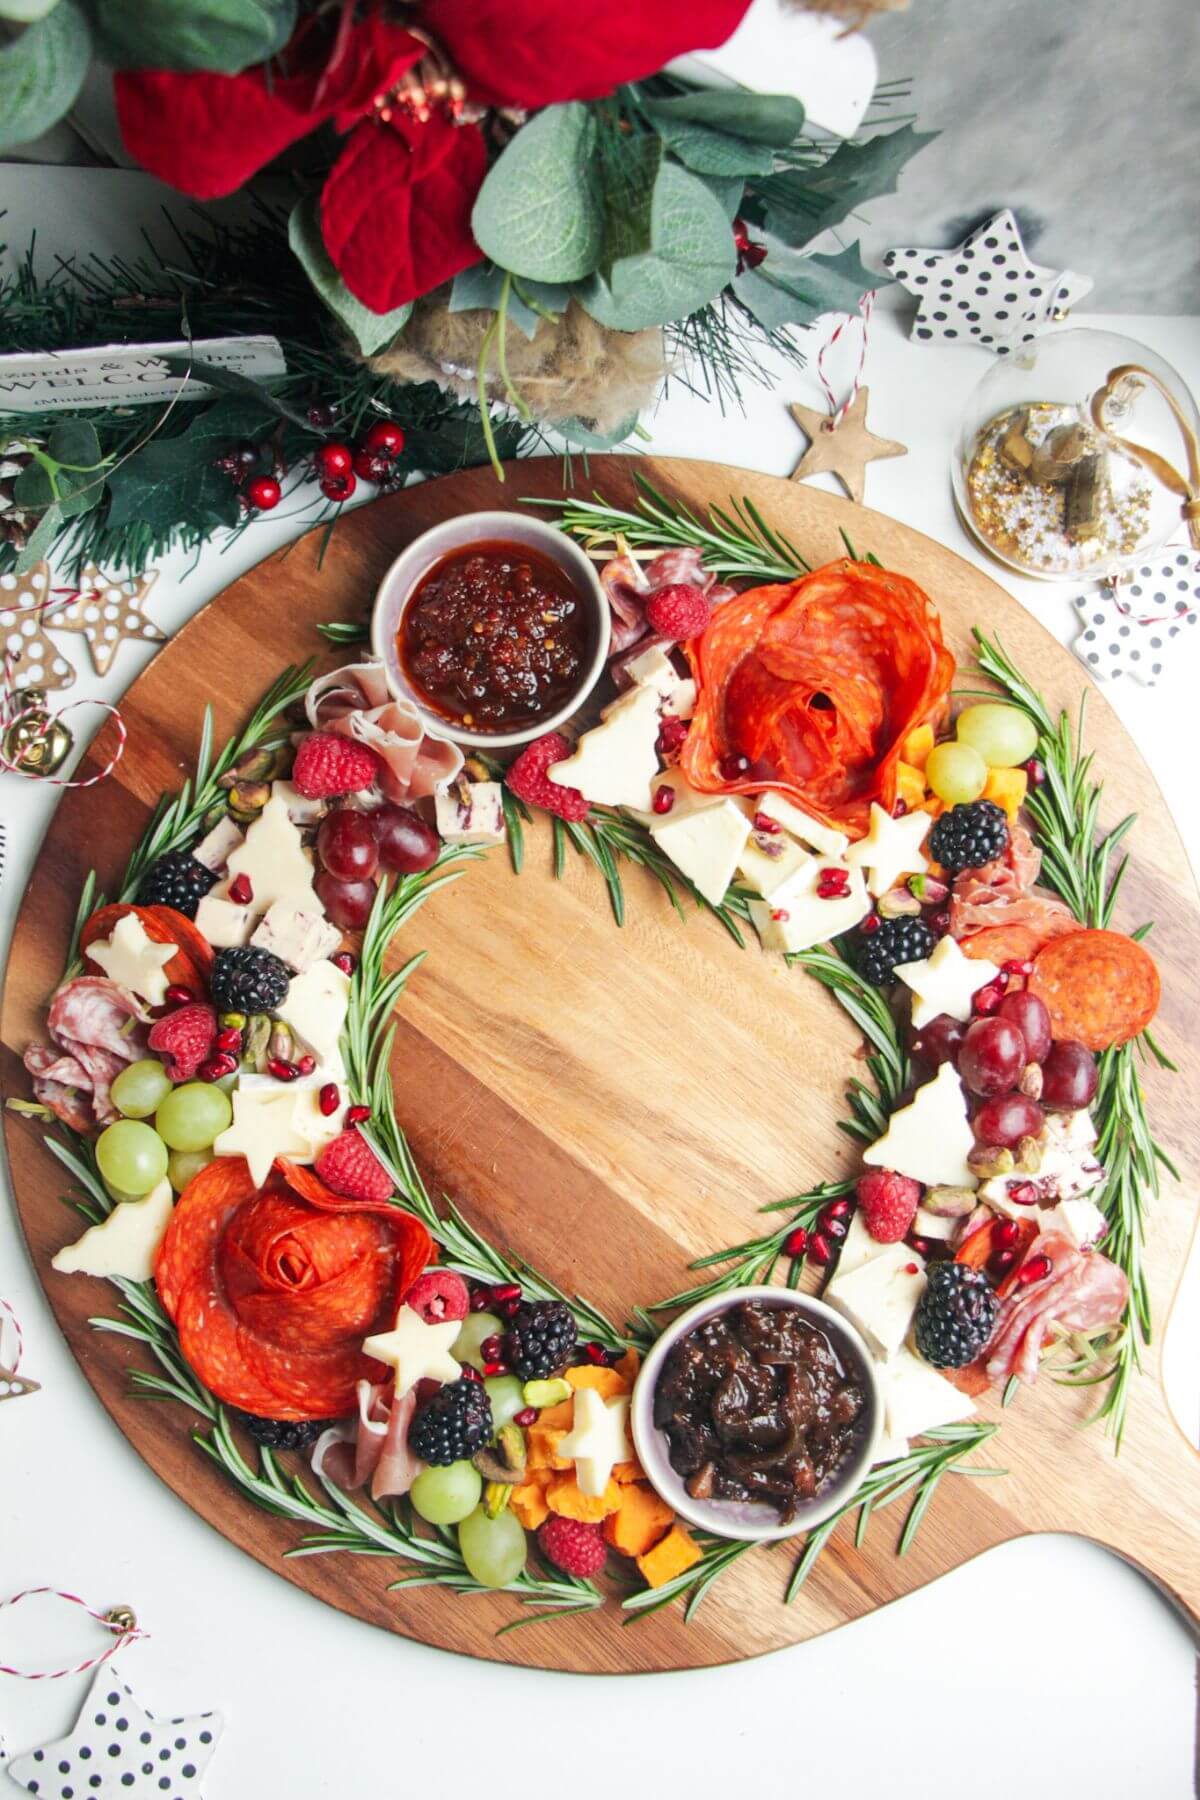 Charcuterie wreath with cured meat, cheeses, chutney.